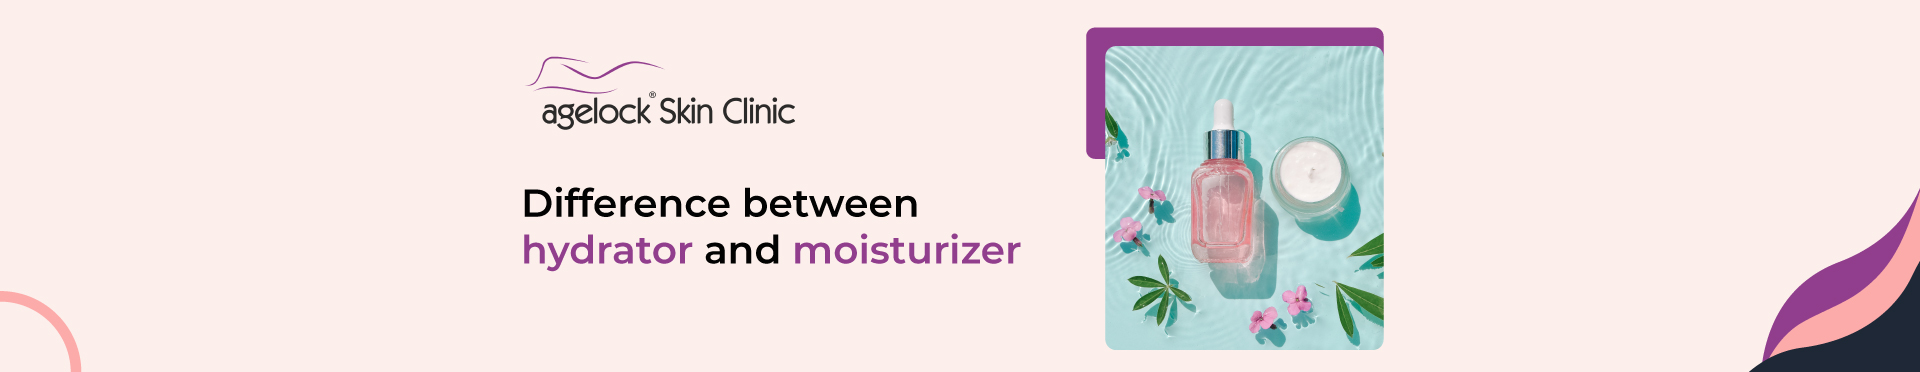 Difference between hydrator and moisturizer